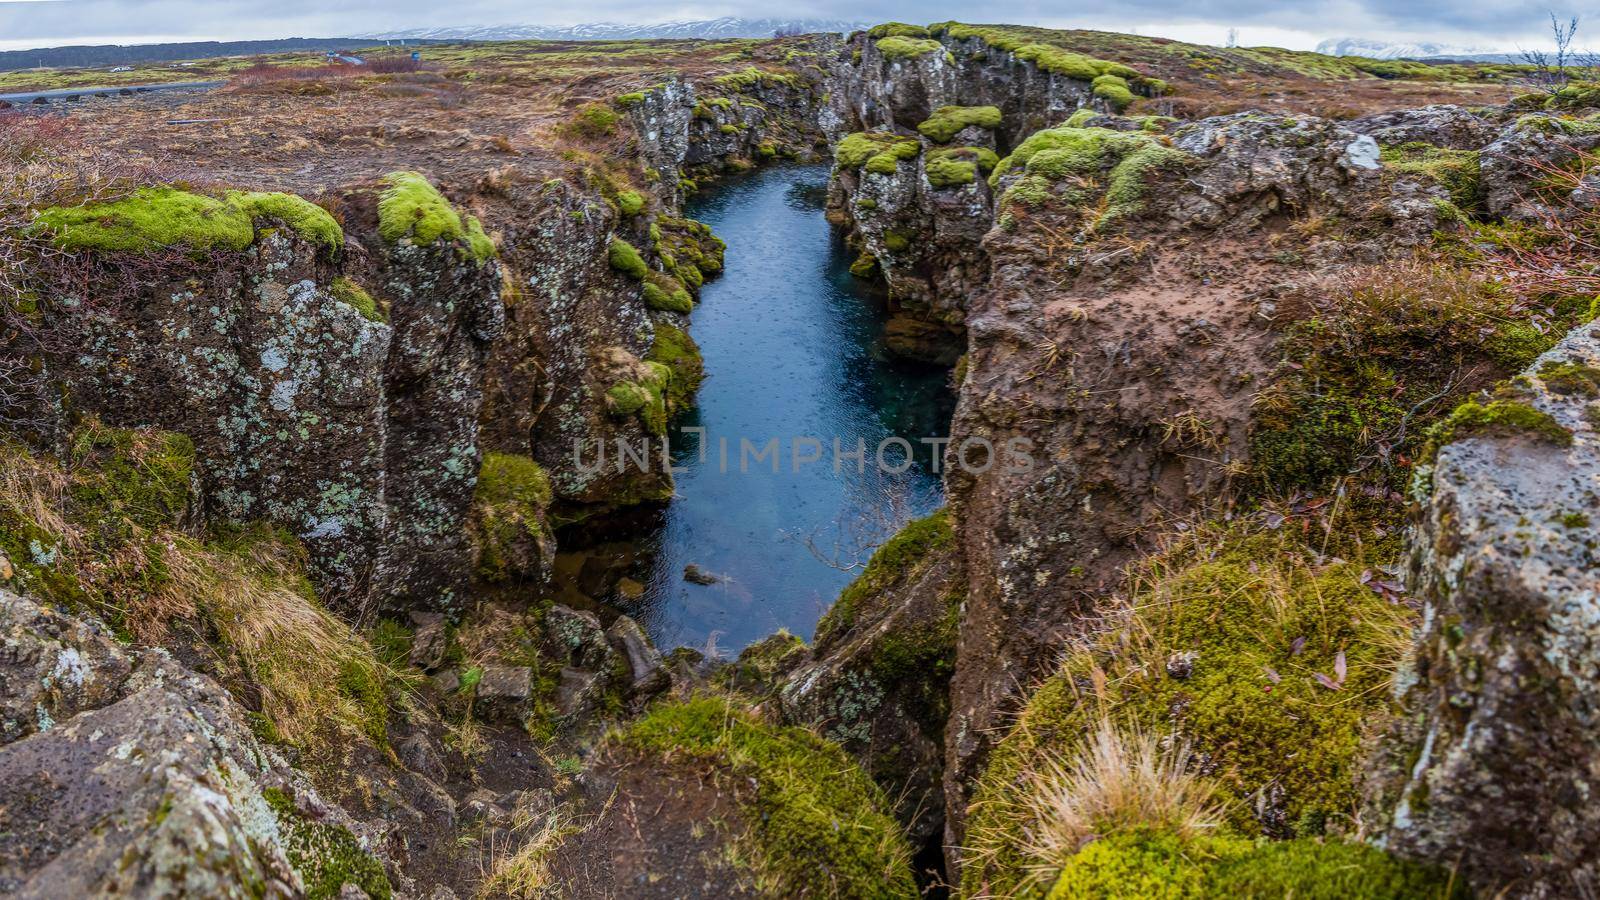 Mossy Icelandic canyon with straight riverbed rainy atmosphere incredible landscape